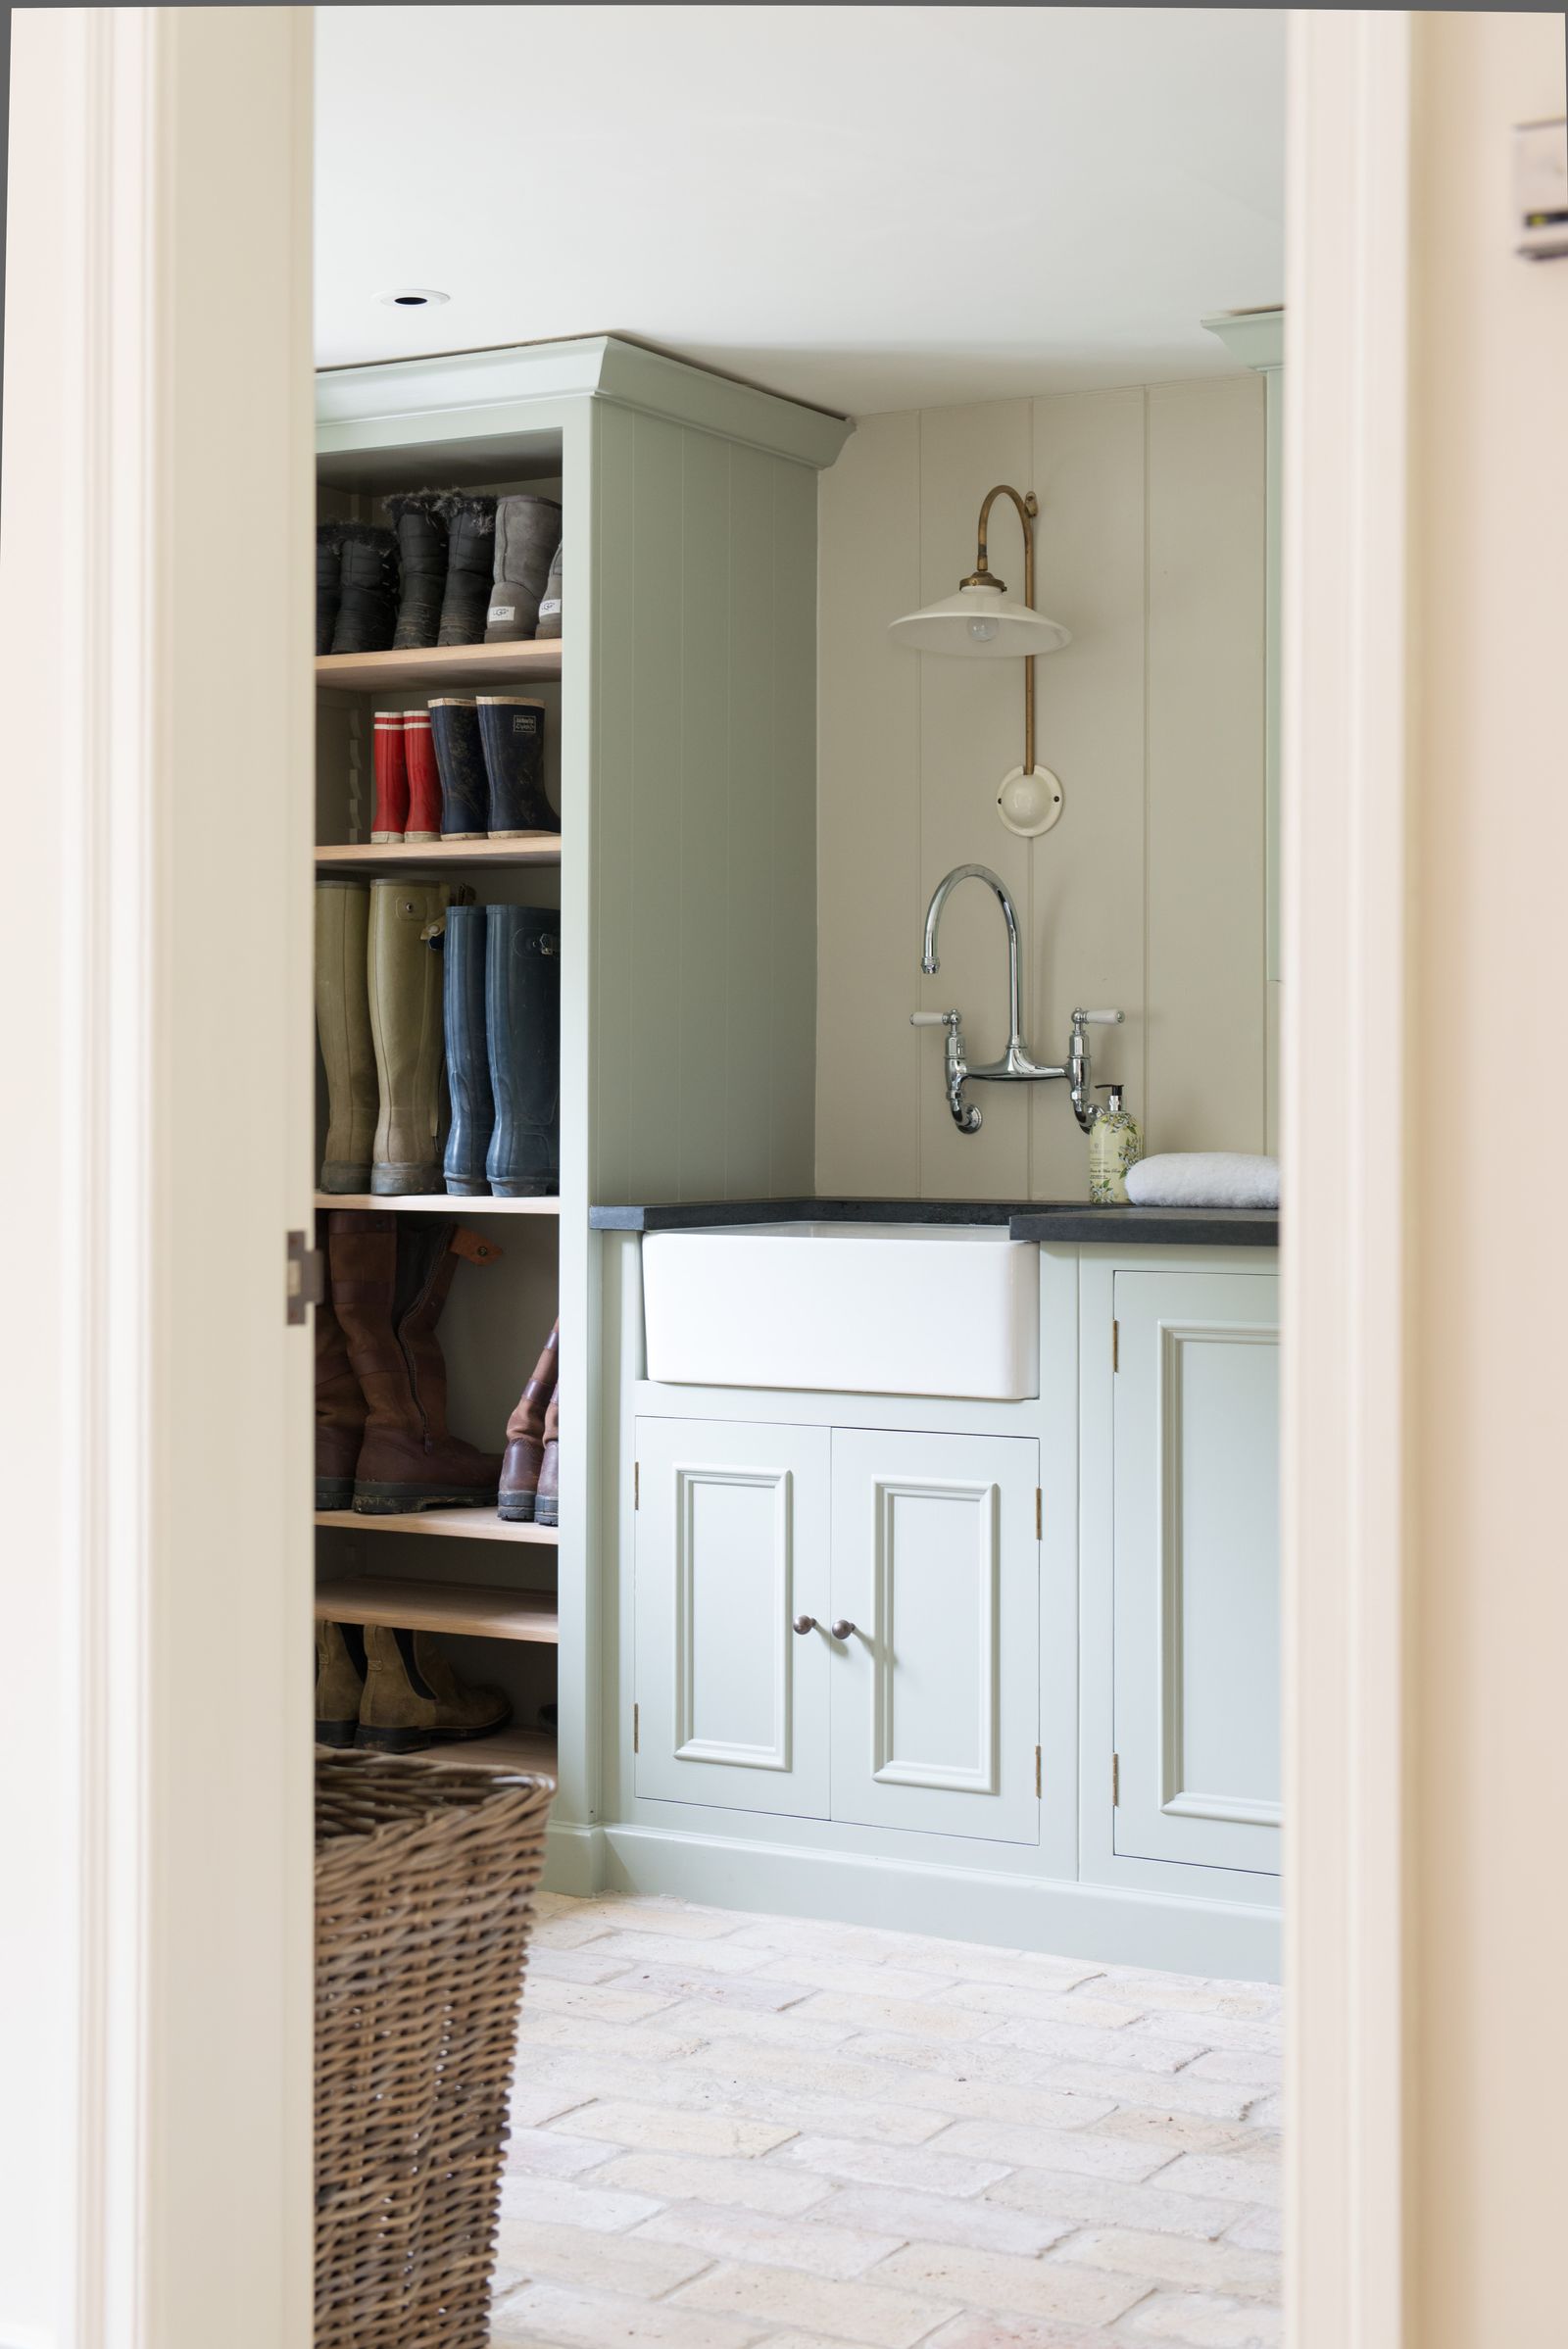 6 essentials for creating the perfect mudroom | Homes & Gardens